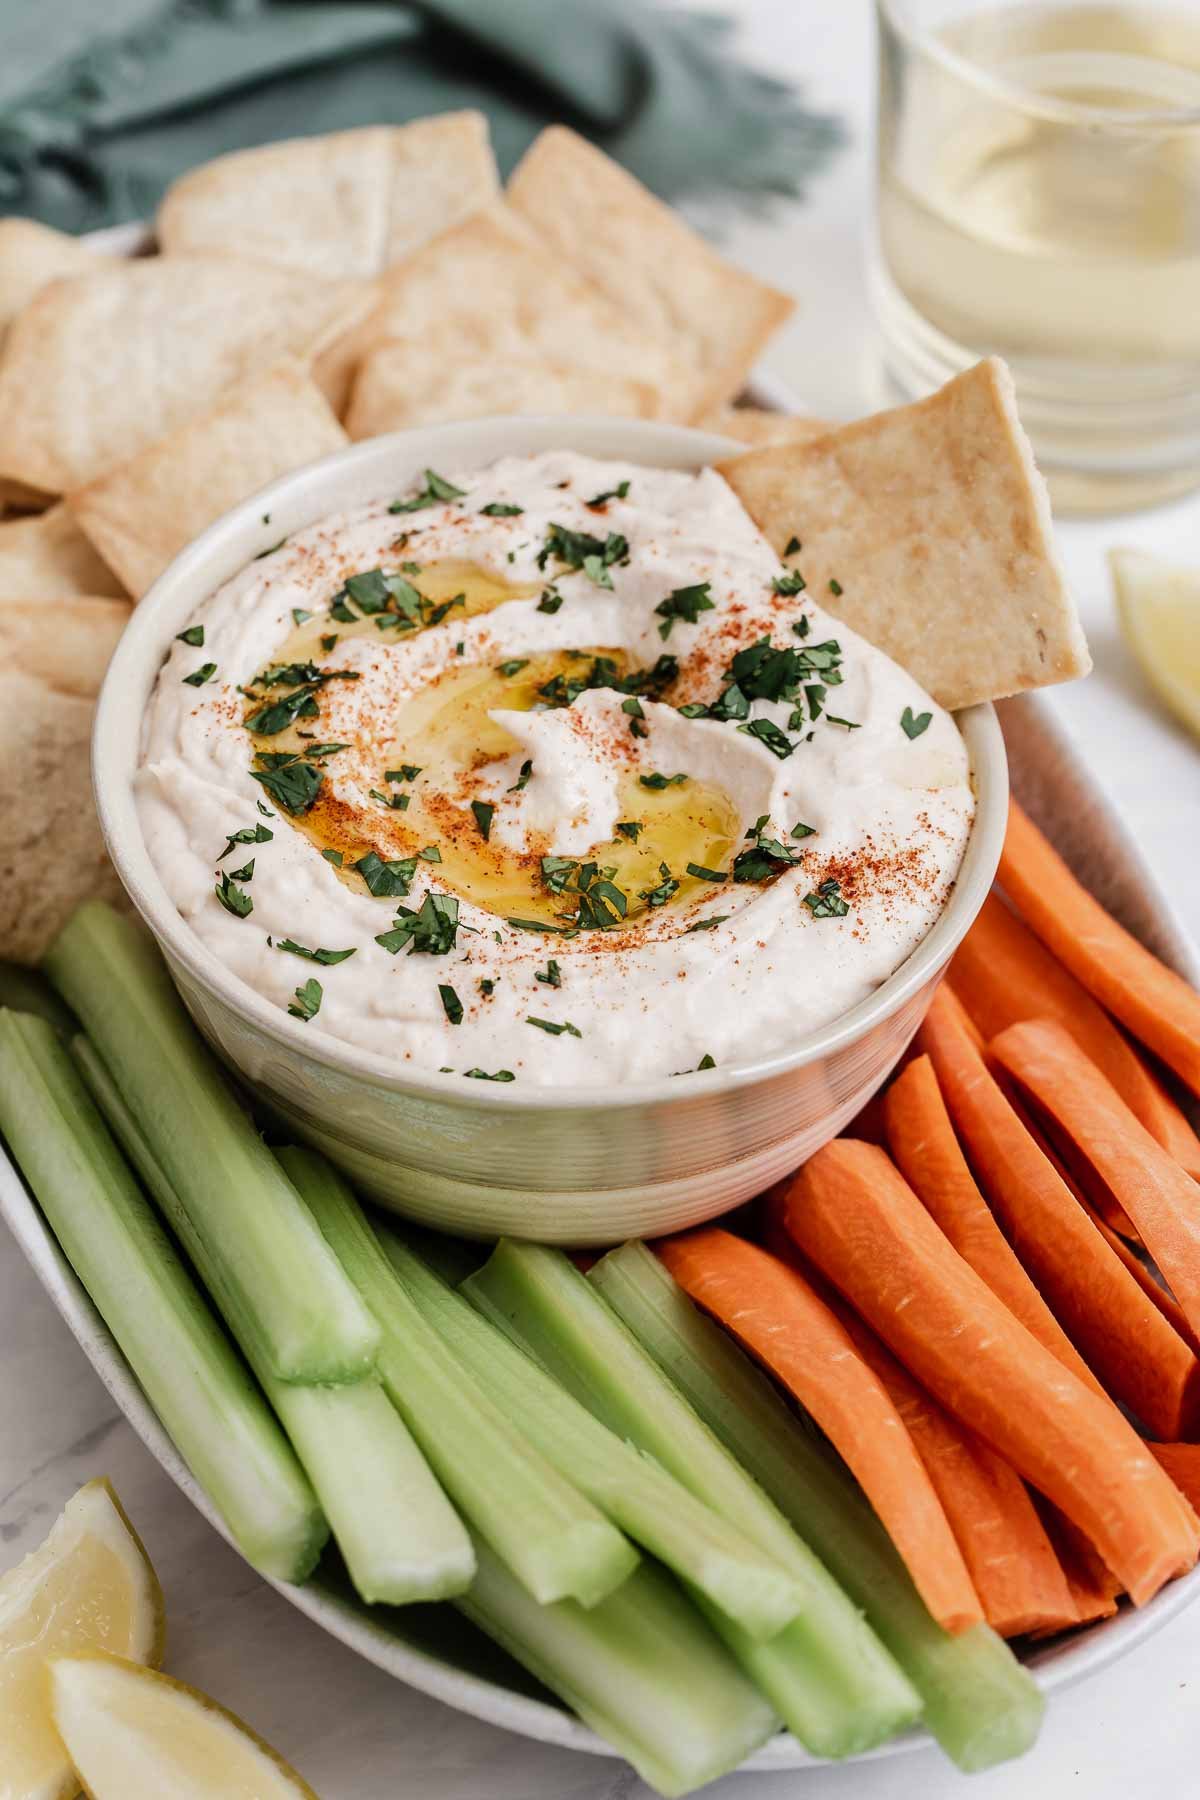 Bowl of white bean hummus with pitas, carrots and celery surrounding.